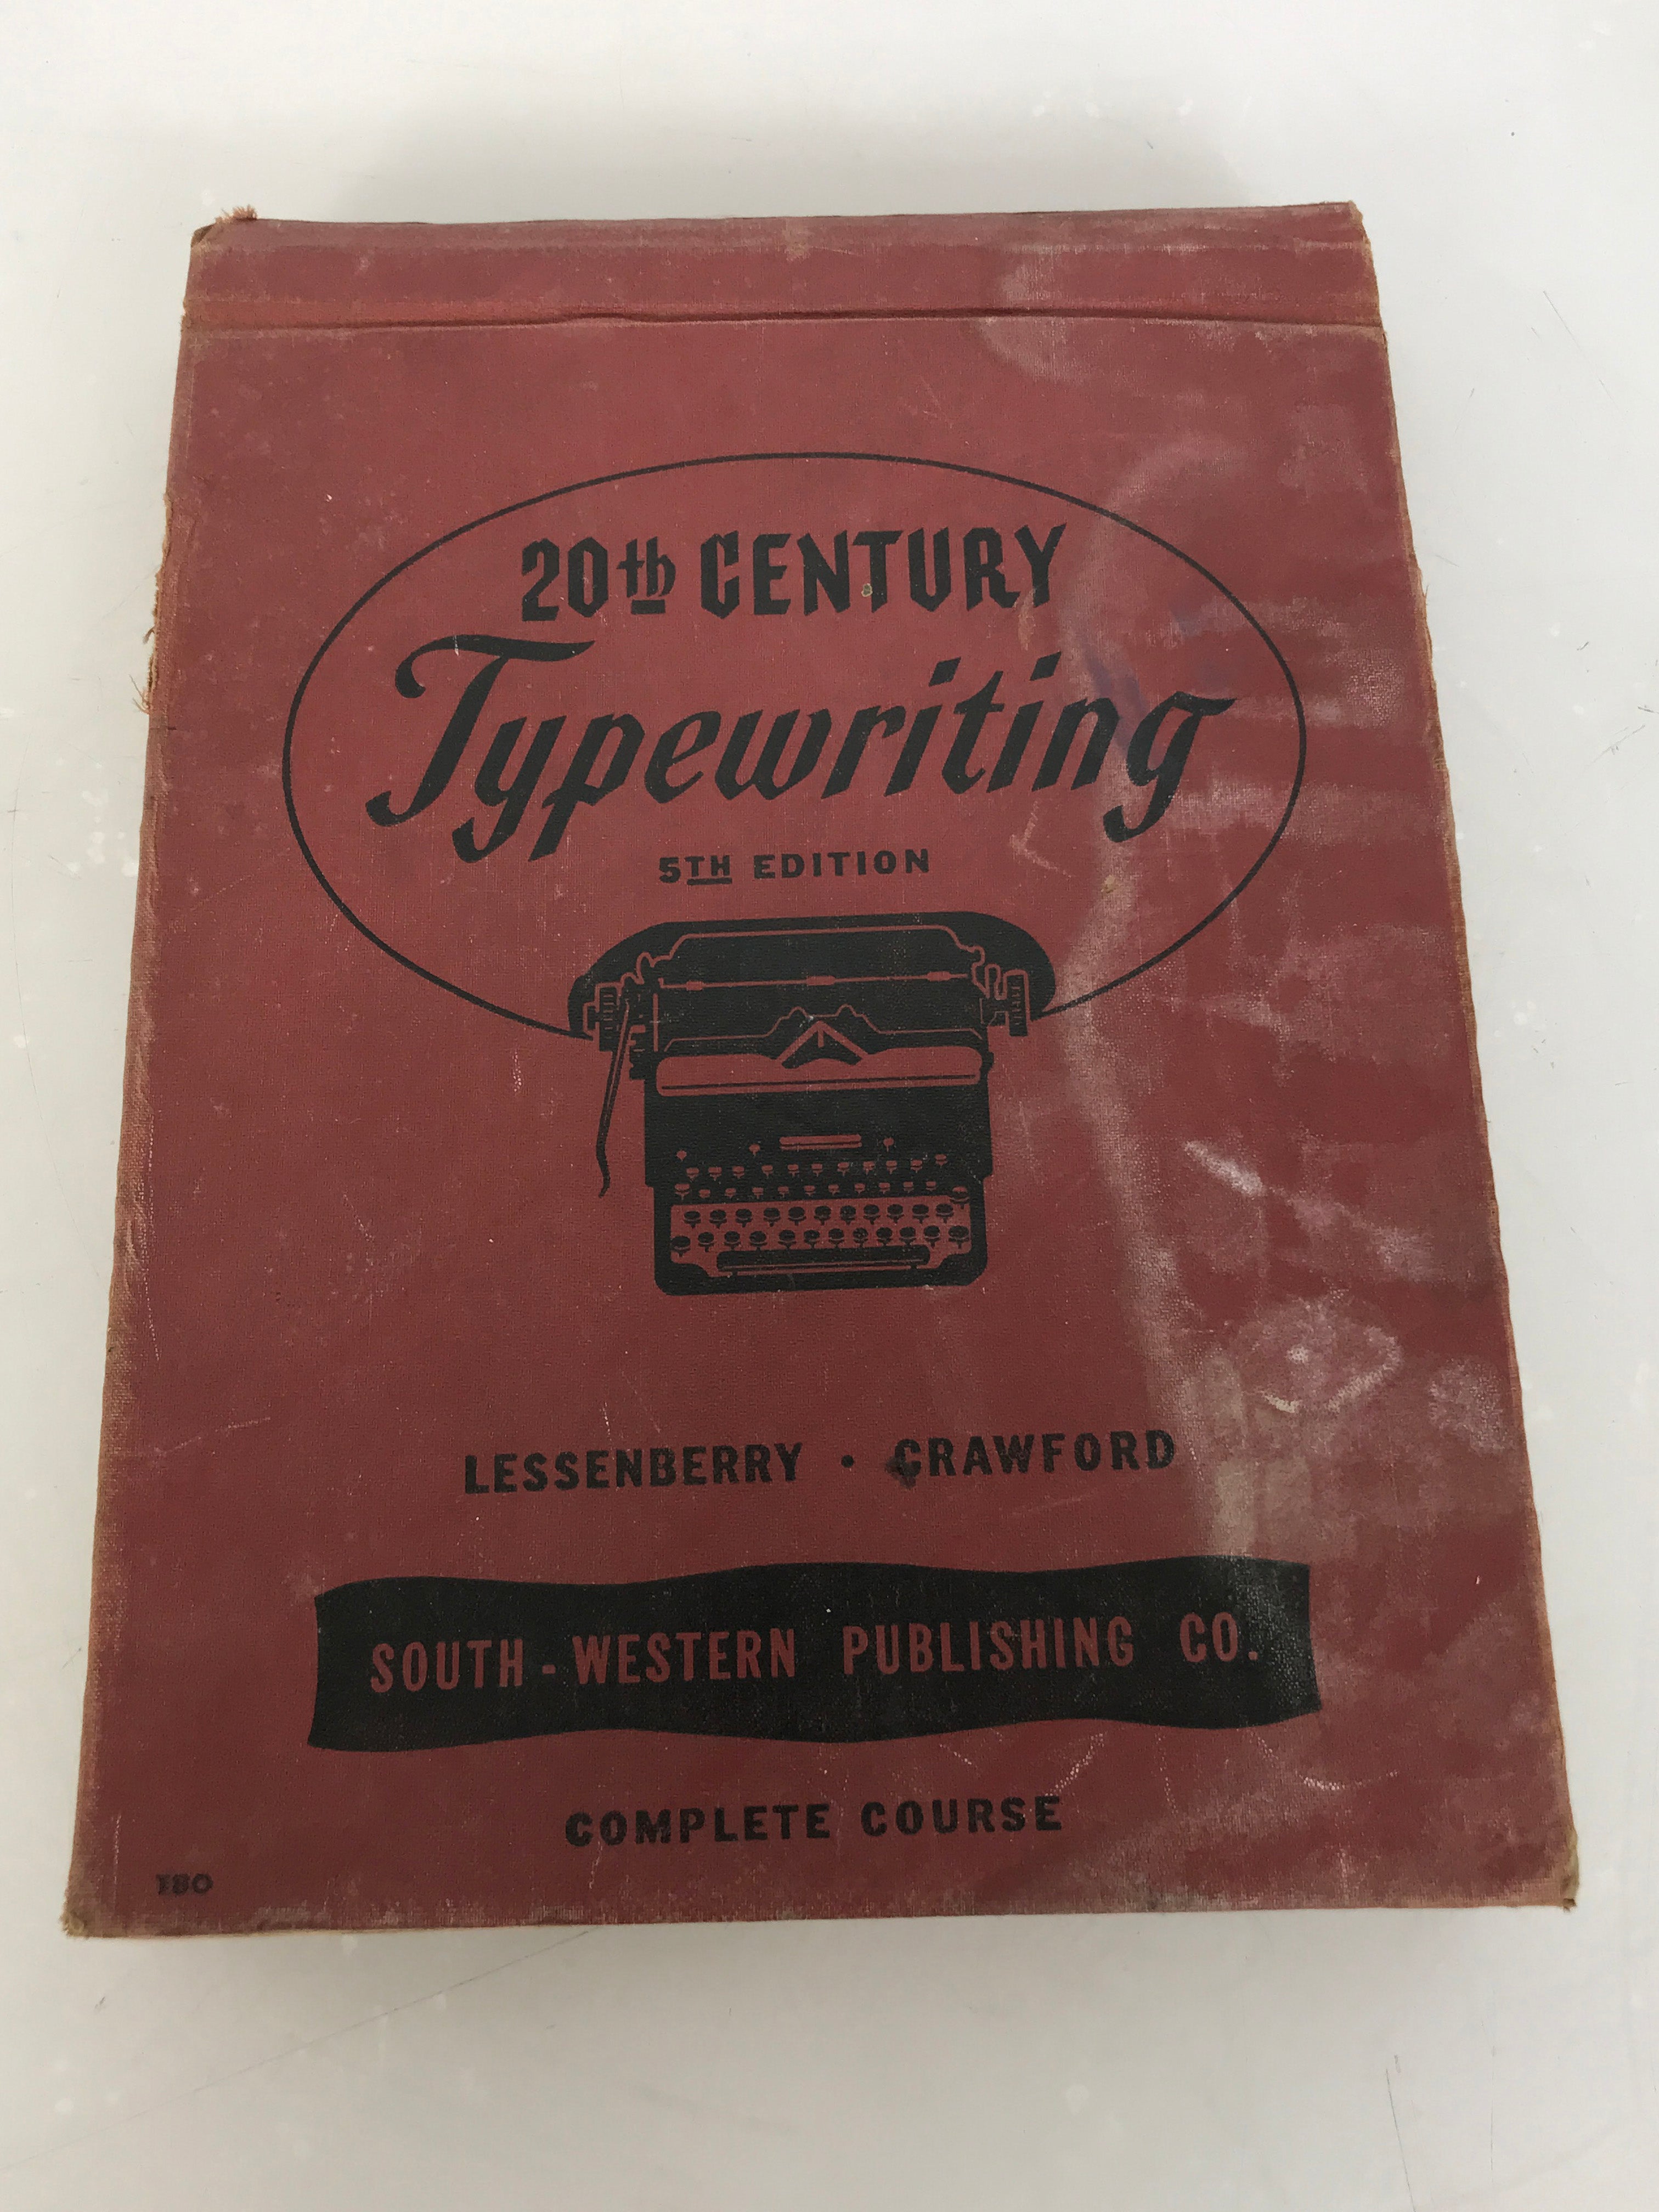 20th Century Typewriting 5th Edition by Lessenberry and Crawford 1947 HC